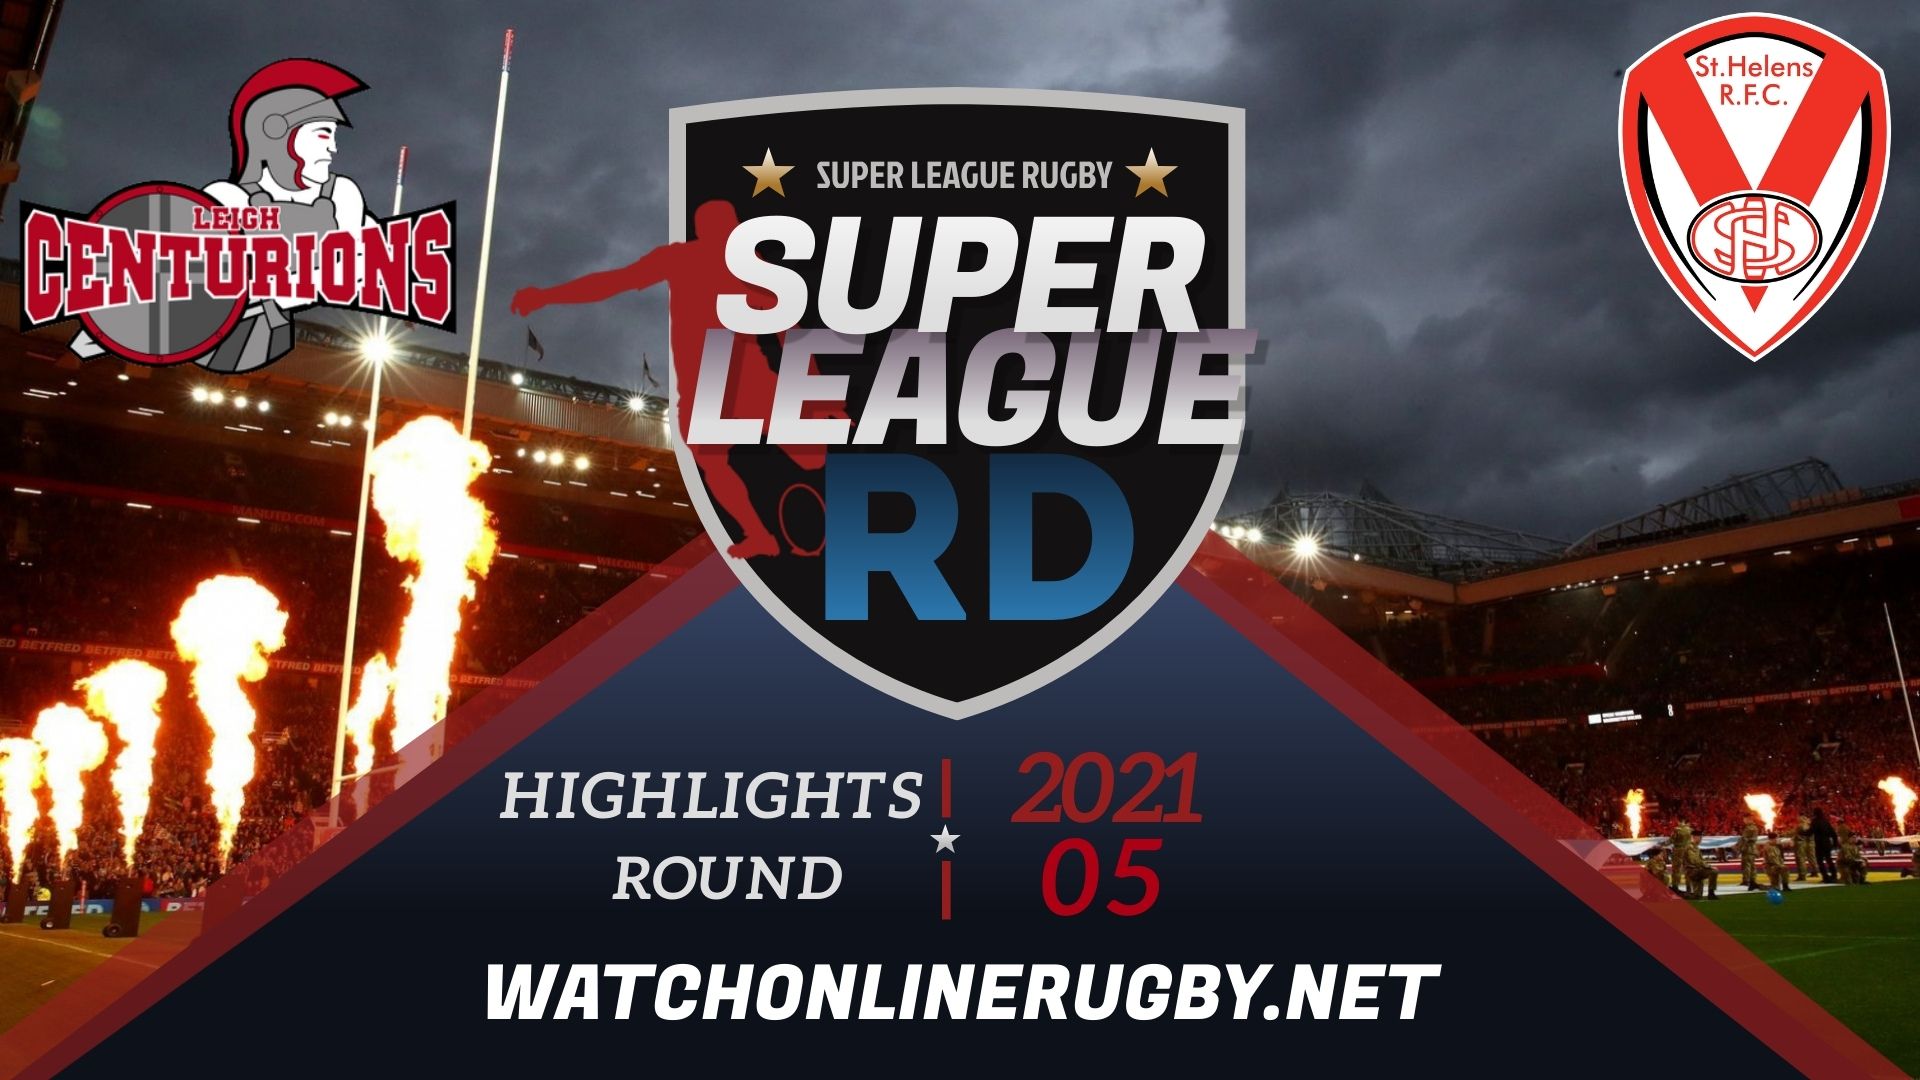 Leigh Centurions Vs St Helens Super League Rugby 2021 RD 5